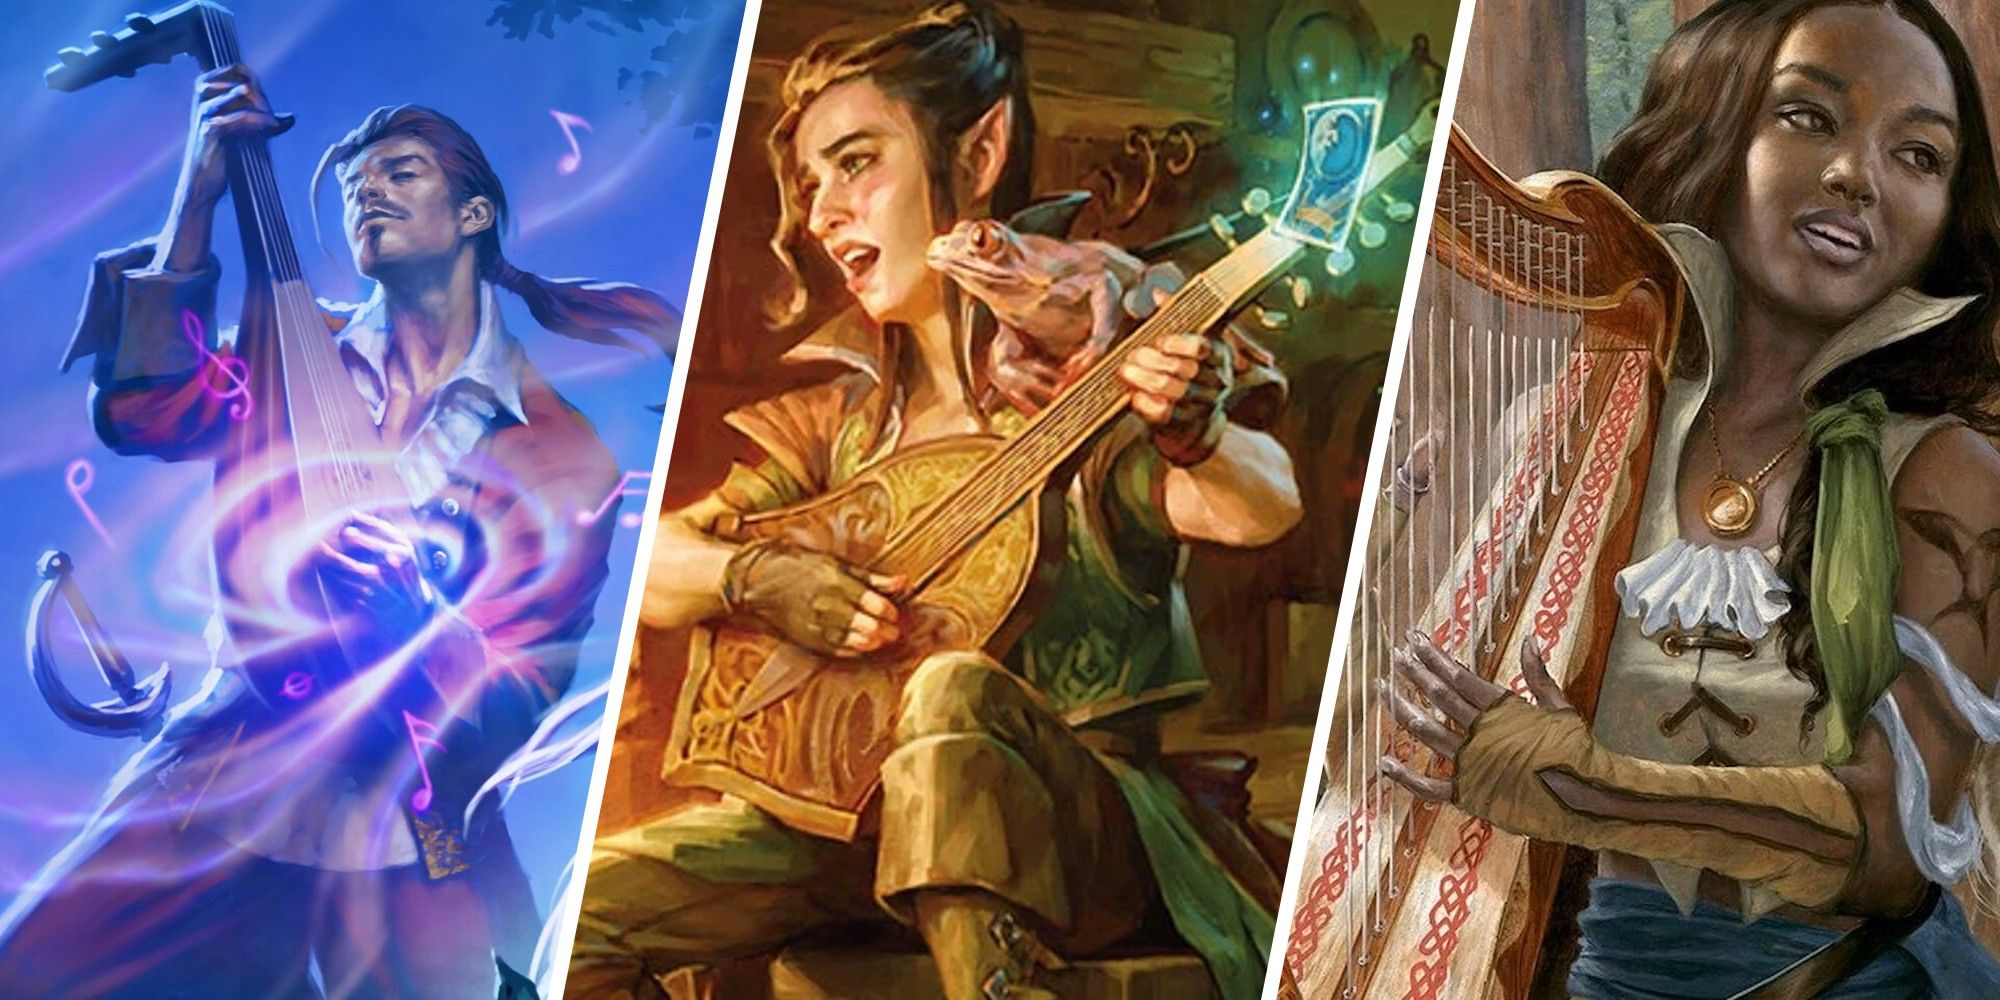 'Neverwinter: Jewel of the North' Bard class art by Wizards of the Coast, Wish by Ekaterina Burmak and Instrument of the Bards by Randy Gallegos.